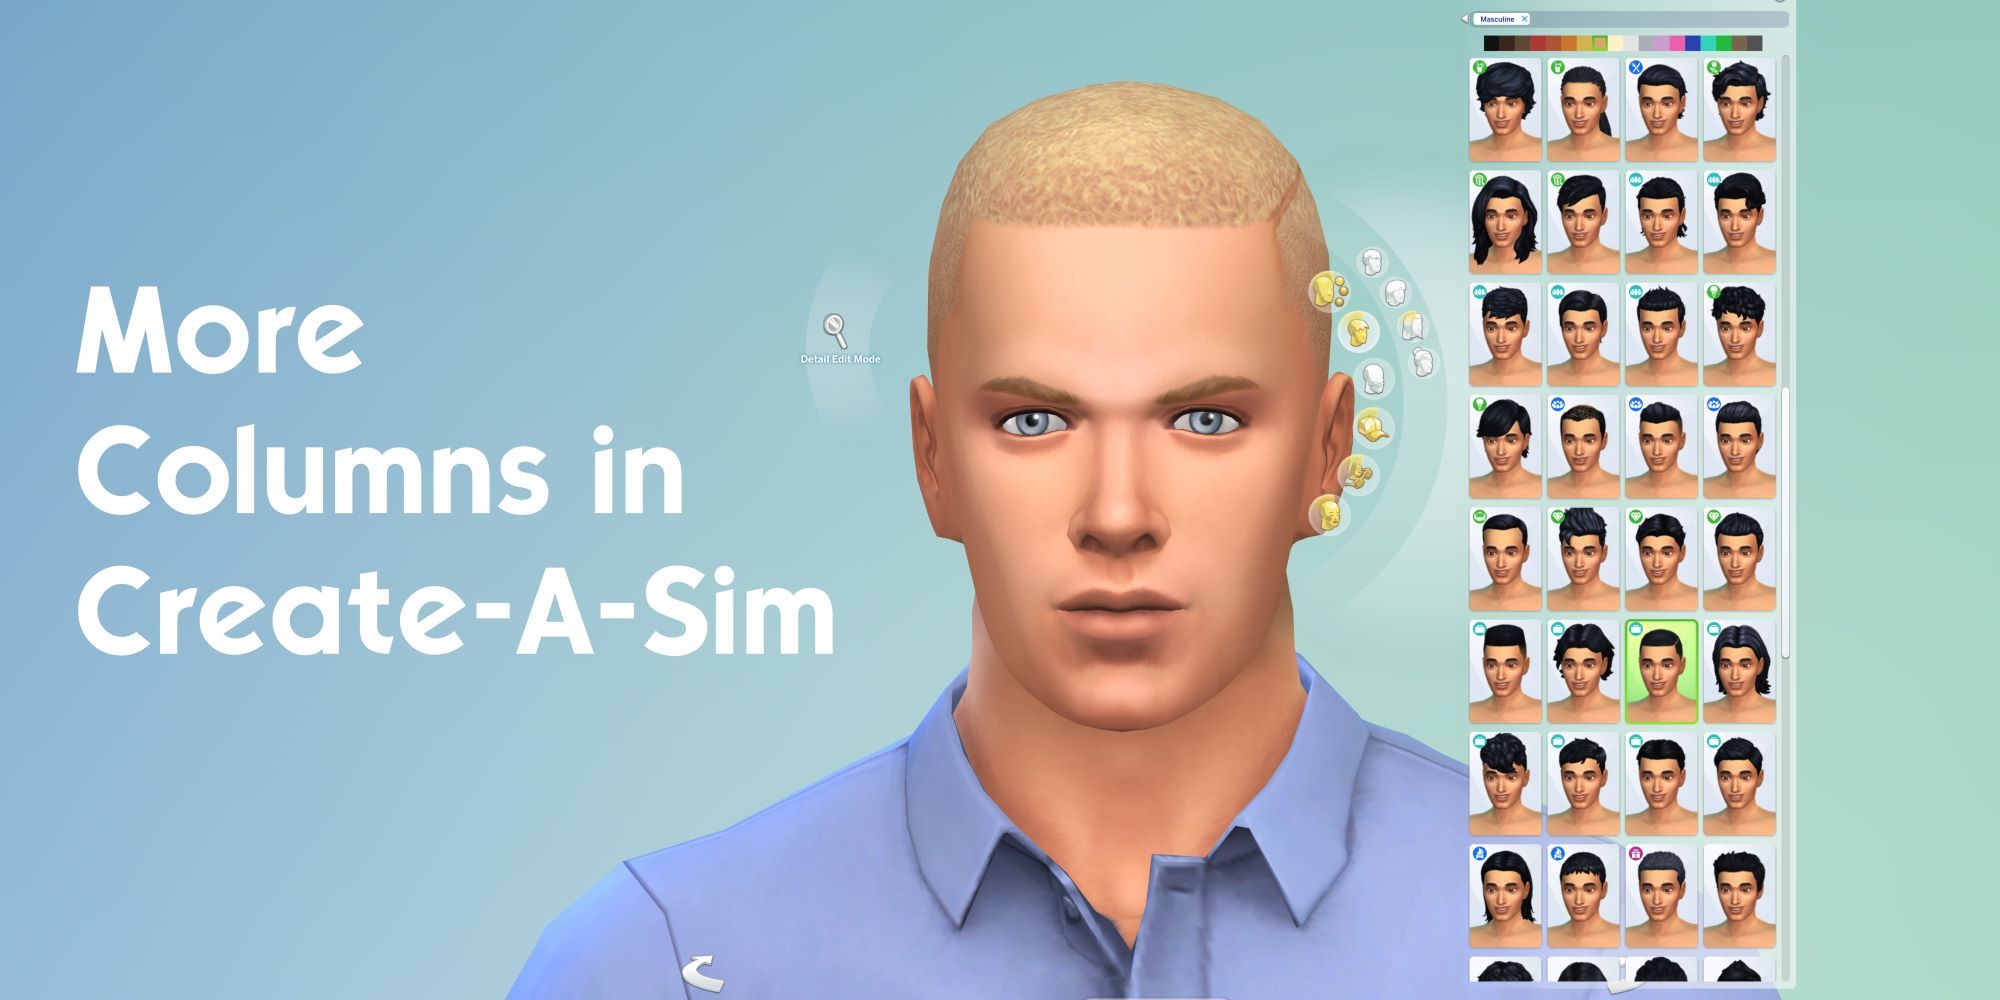 A screenshot of The Sims 4's create a sim menu with the text 'More Columns in Create-A-Sim' overlayed.